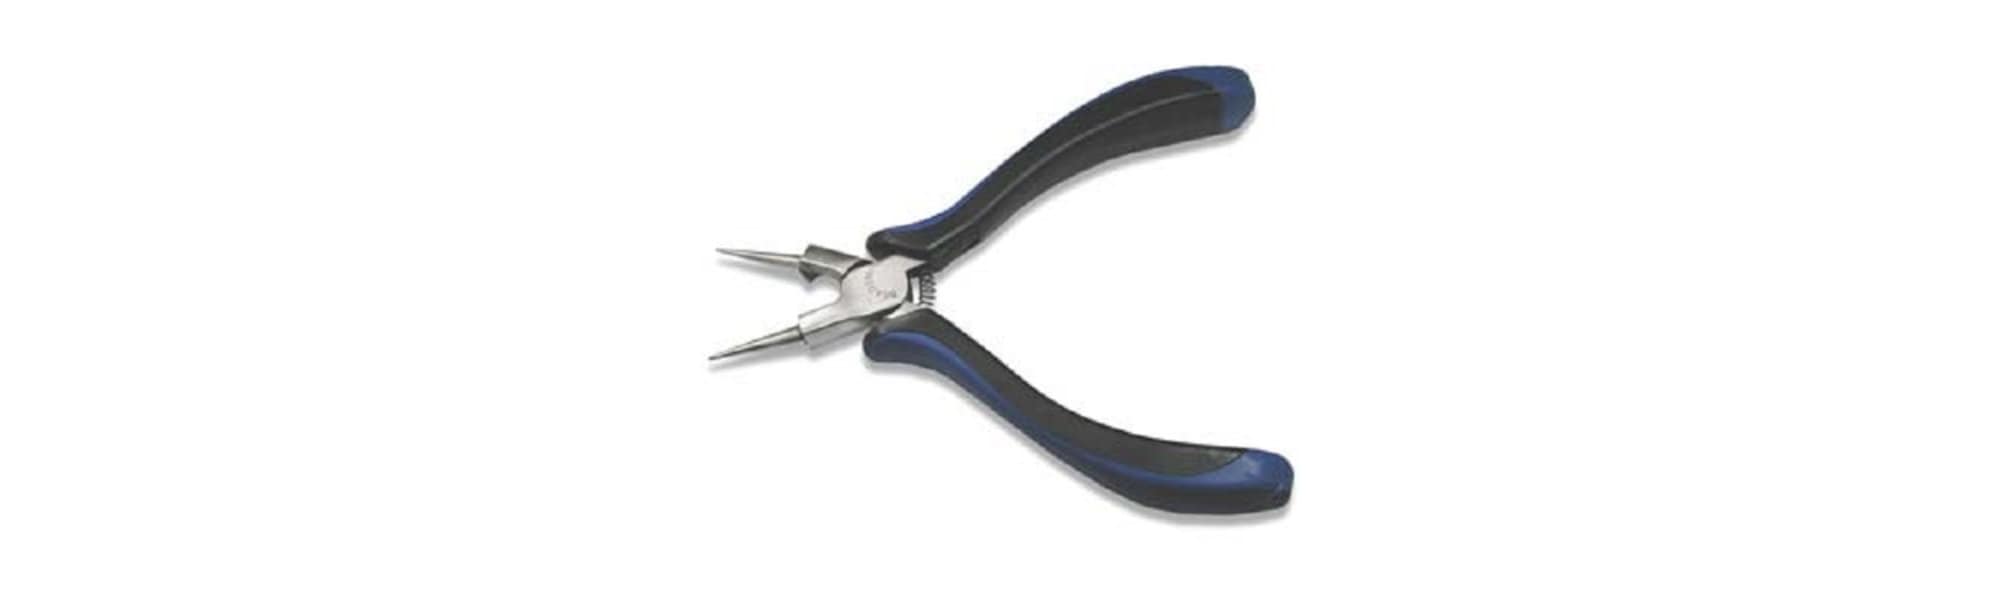 Jewelry Pliers, Round Flat Nose, Miniature Precision Coiler, Jewelry Making  Tool, 1046 52 